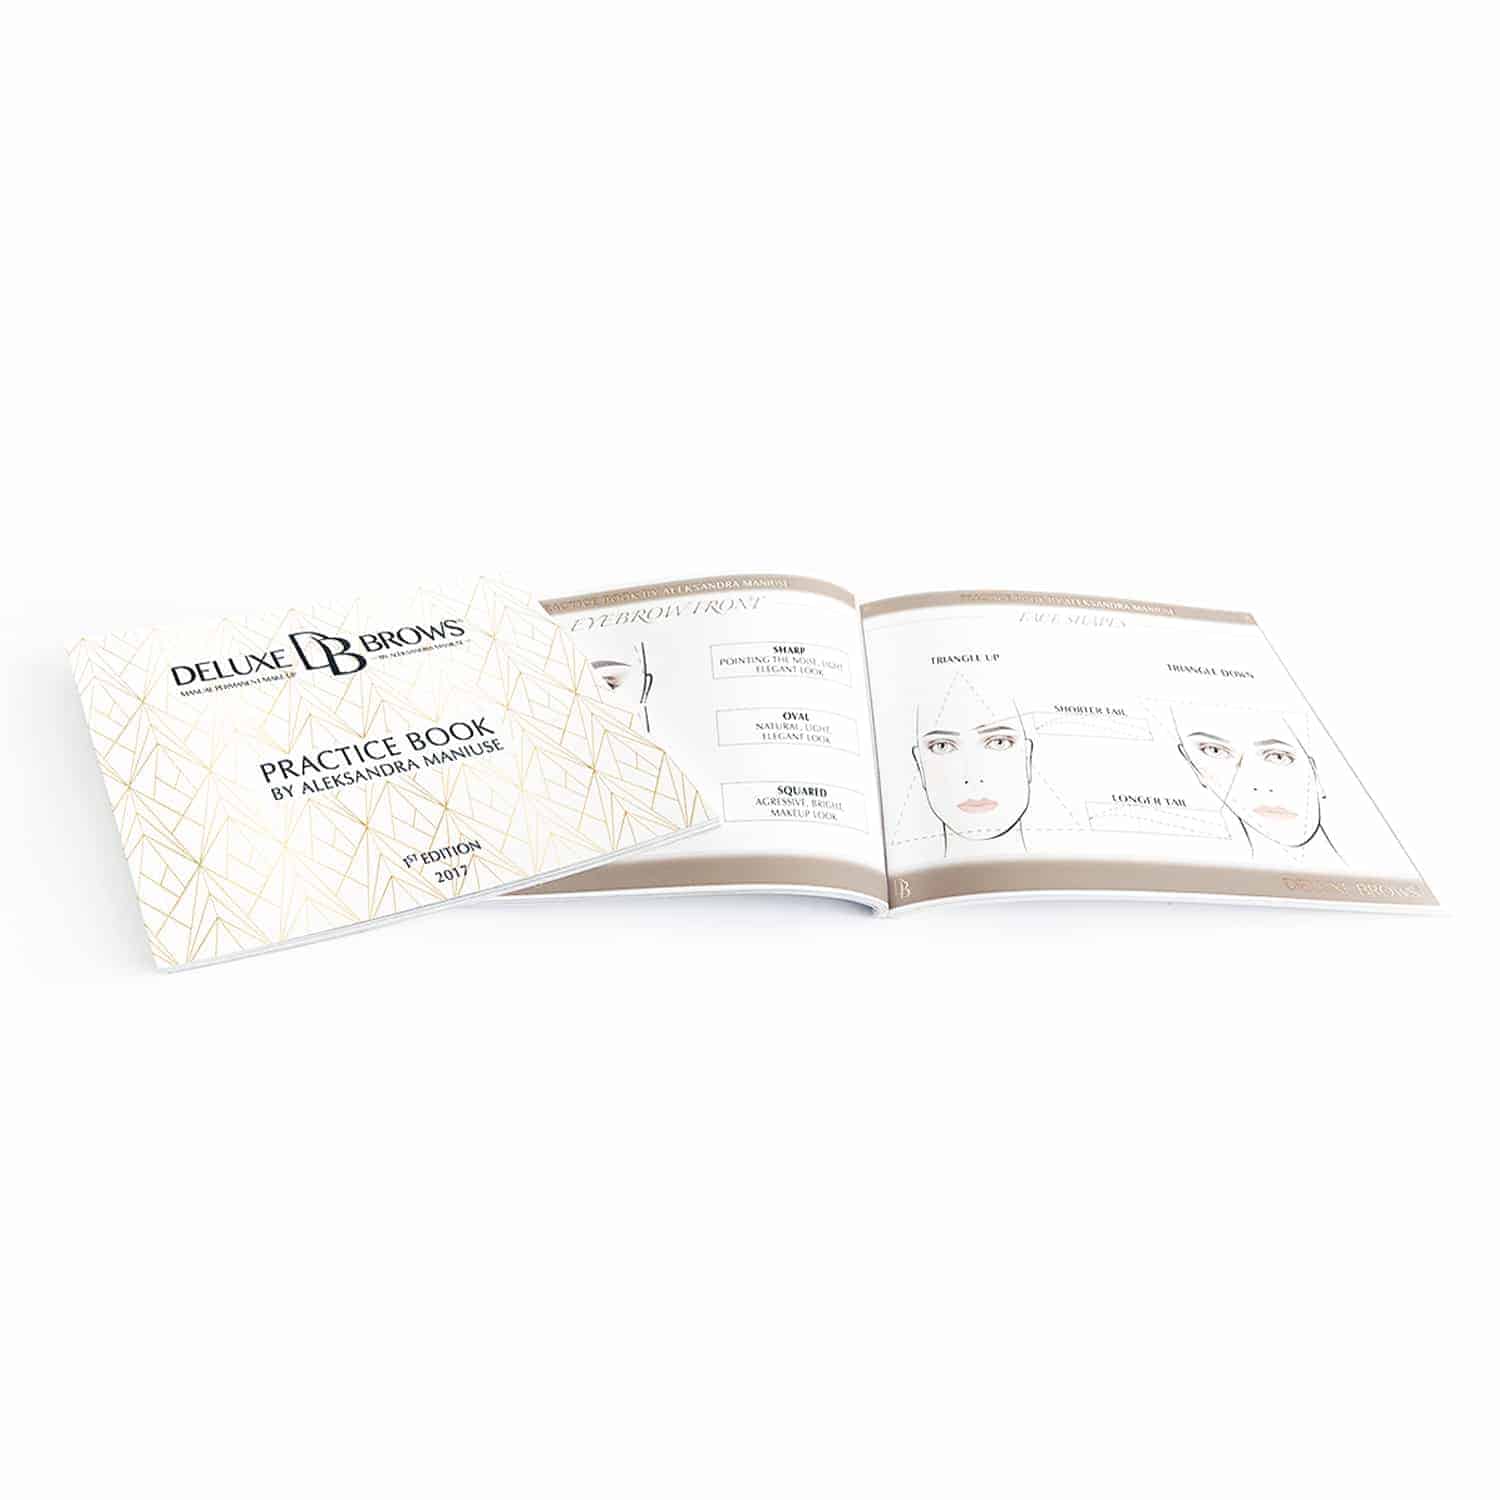 Deluxe Brows® Practice Set by Aleksandra Maniuse